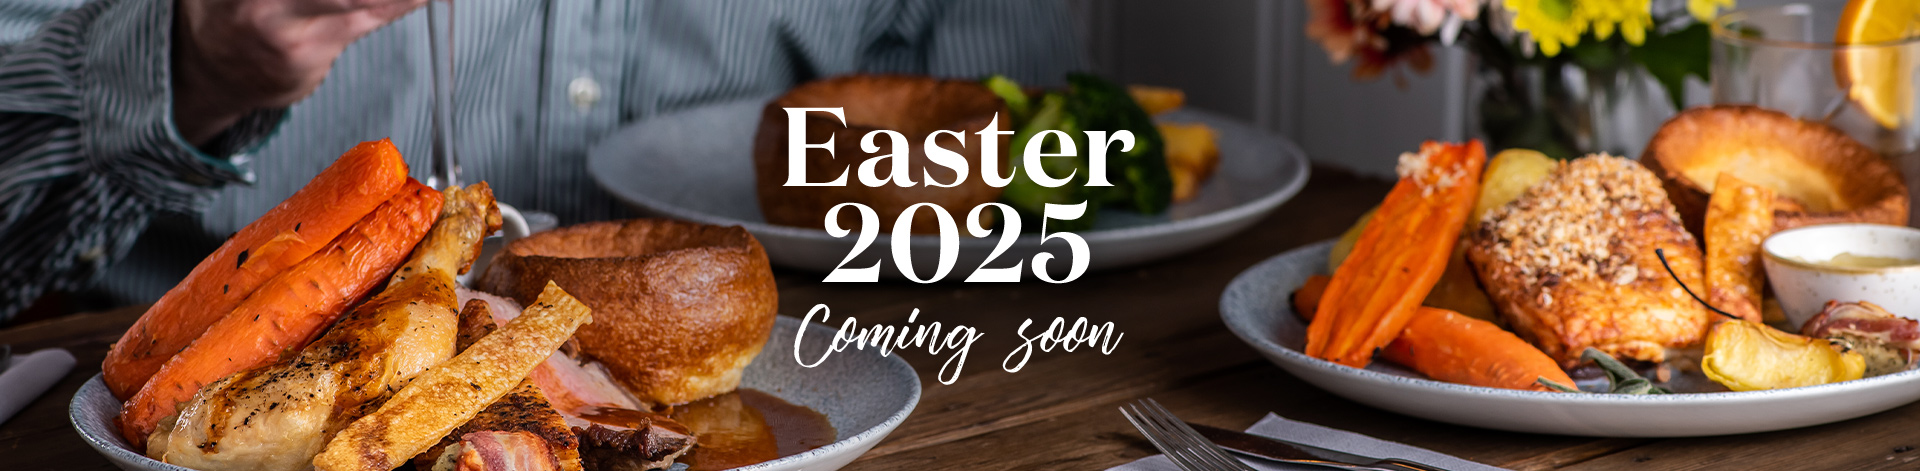 Easter at The Sandpiper in Ormskirk